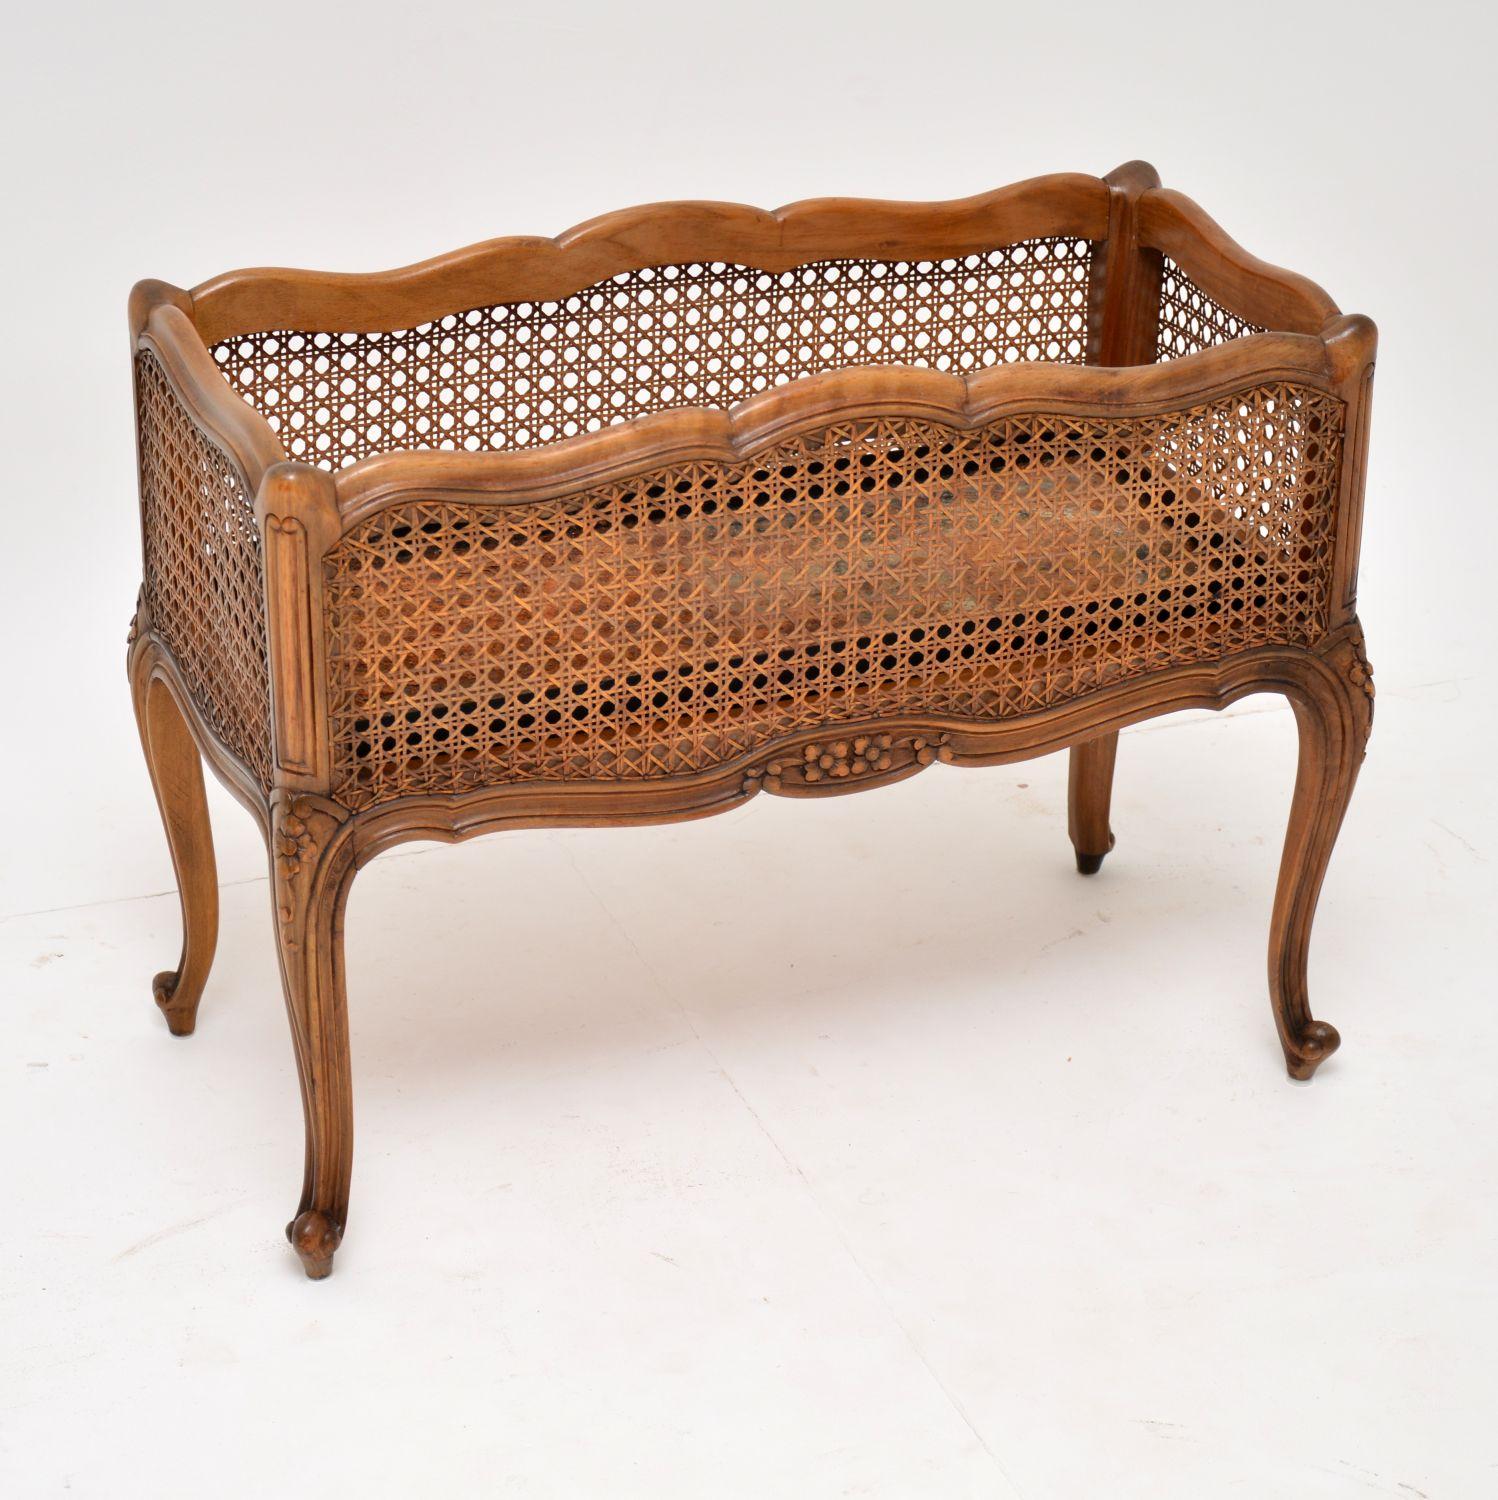 Very useful antique French style walnut plant holder with cane side panels, in good original condition and dating to circa 1890-1910 period.

It has a nice warm color, with lots of character, lovely shaping all-over and the carvings are crisp. The